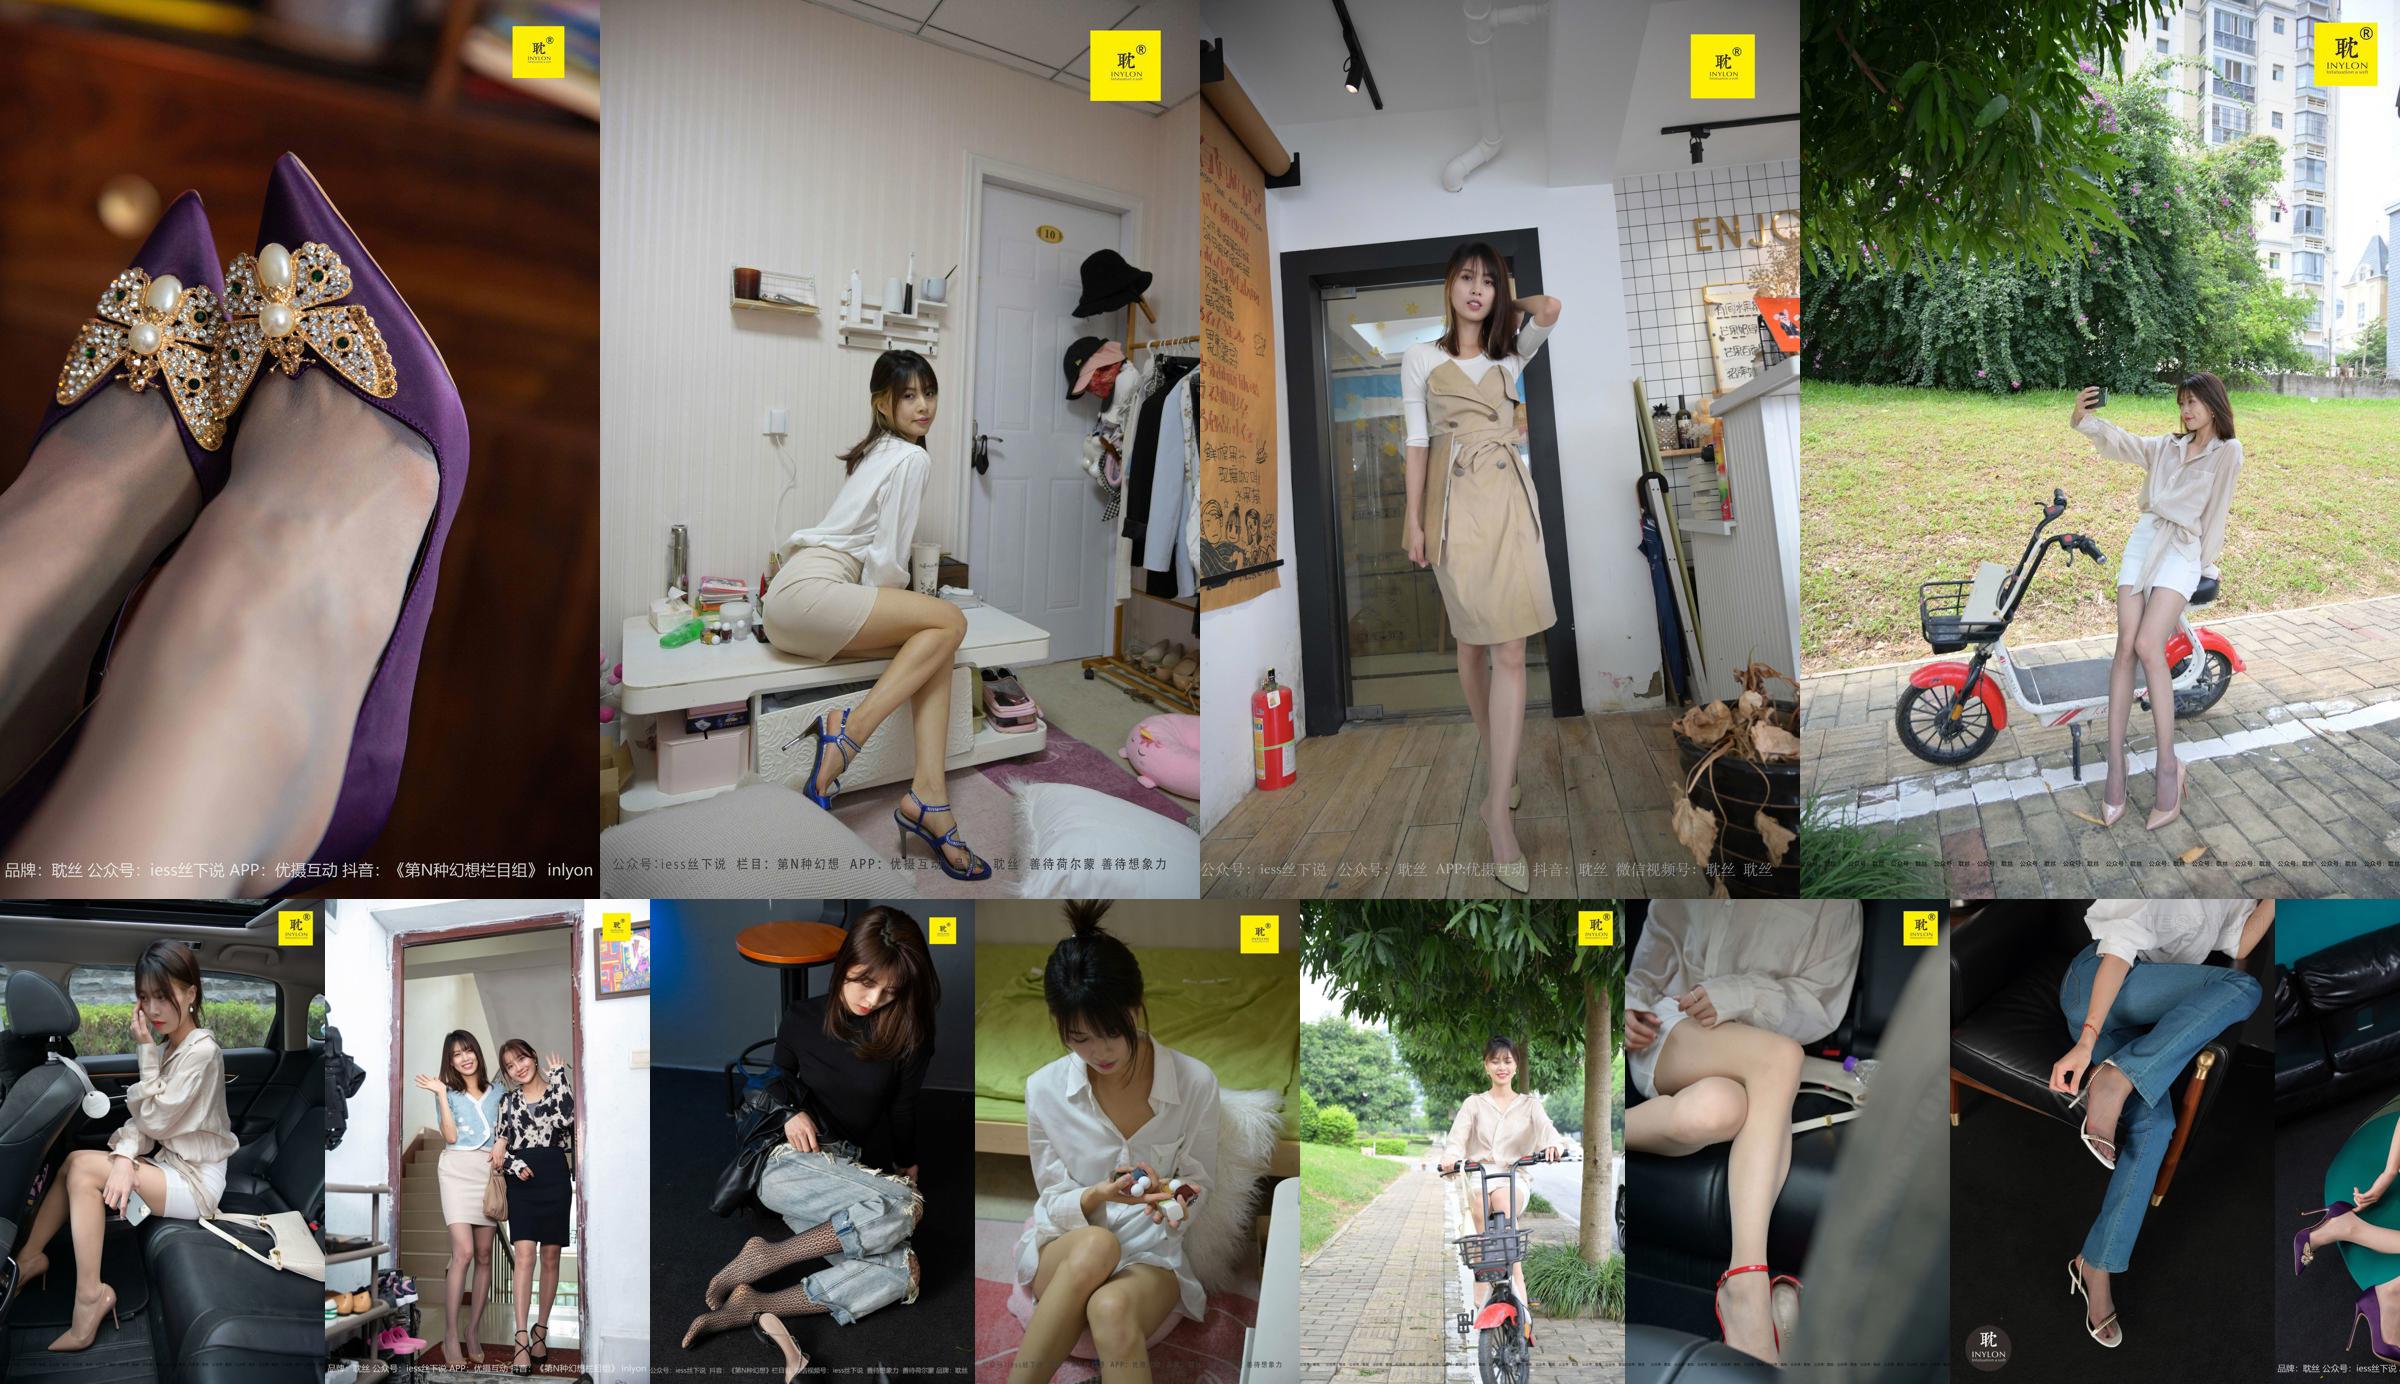 [IESS] Purple High Heels in "The Nth Possibility" ④ Director Qiu, stockings and beautiful legs No.abcb86 Page 4